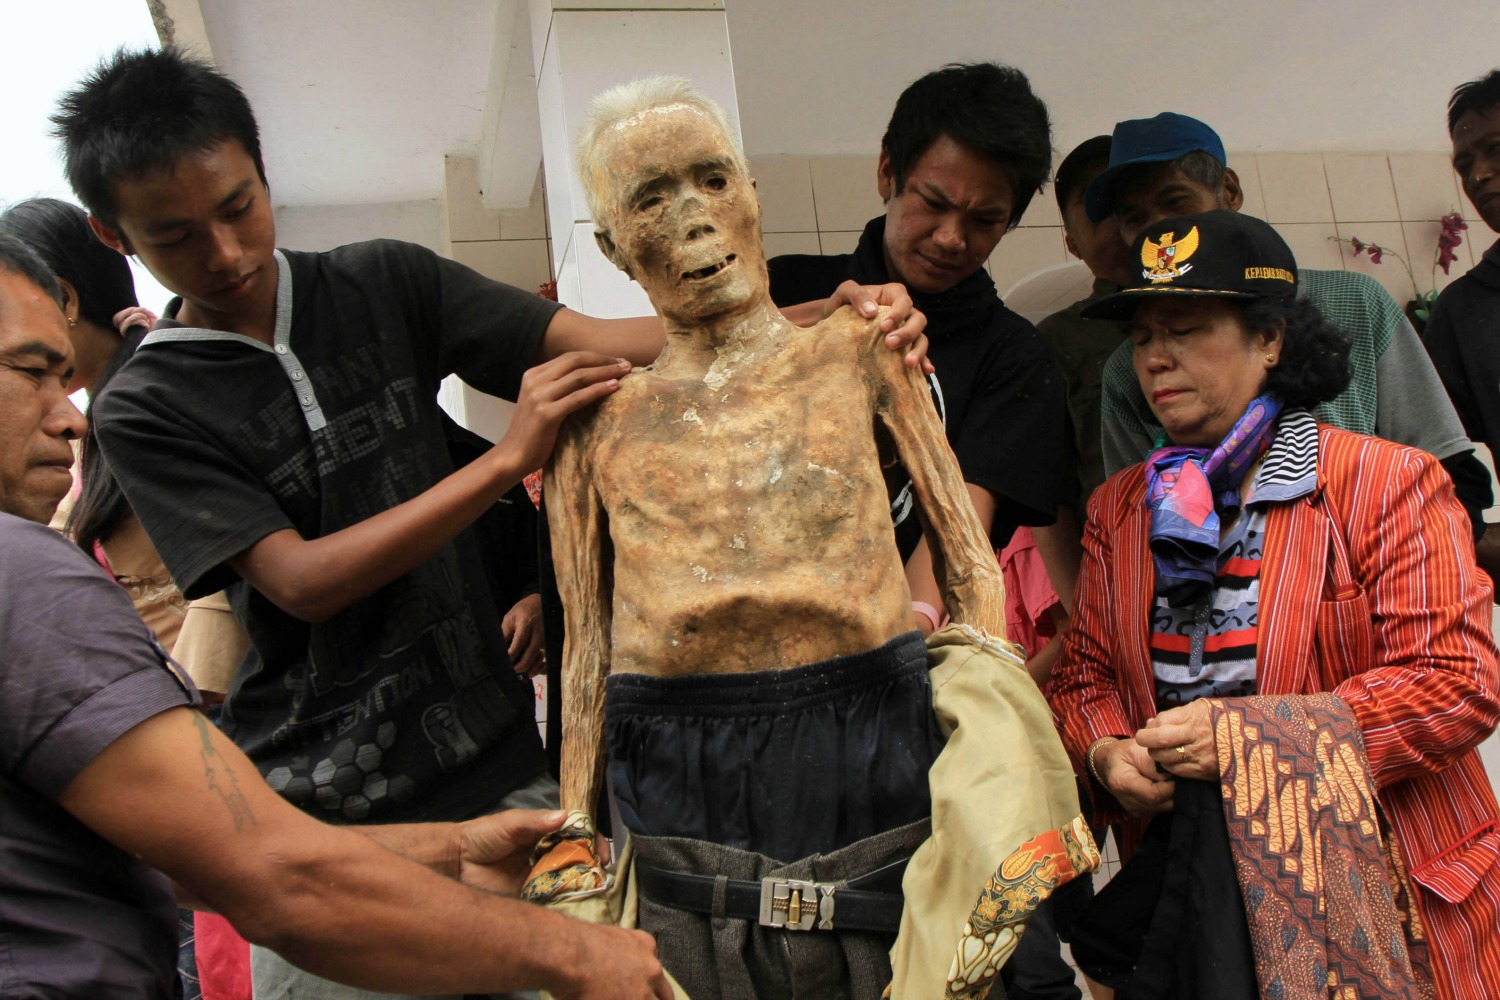 Indonesia digs up their dead, dresses and parades them in the streets